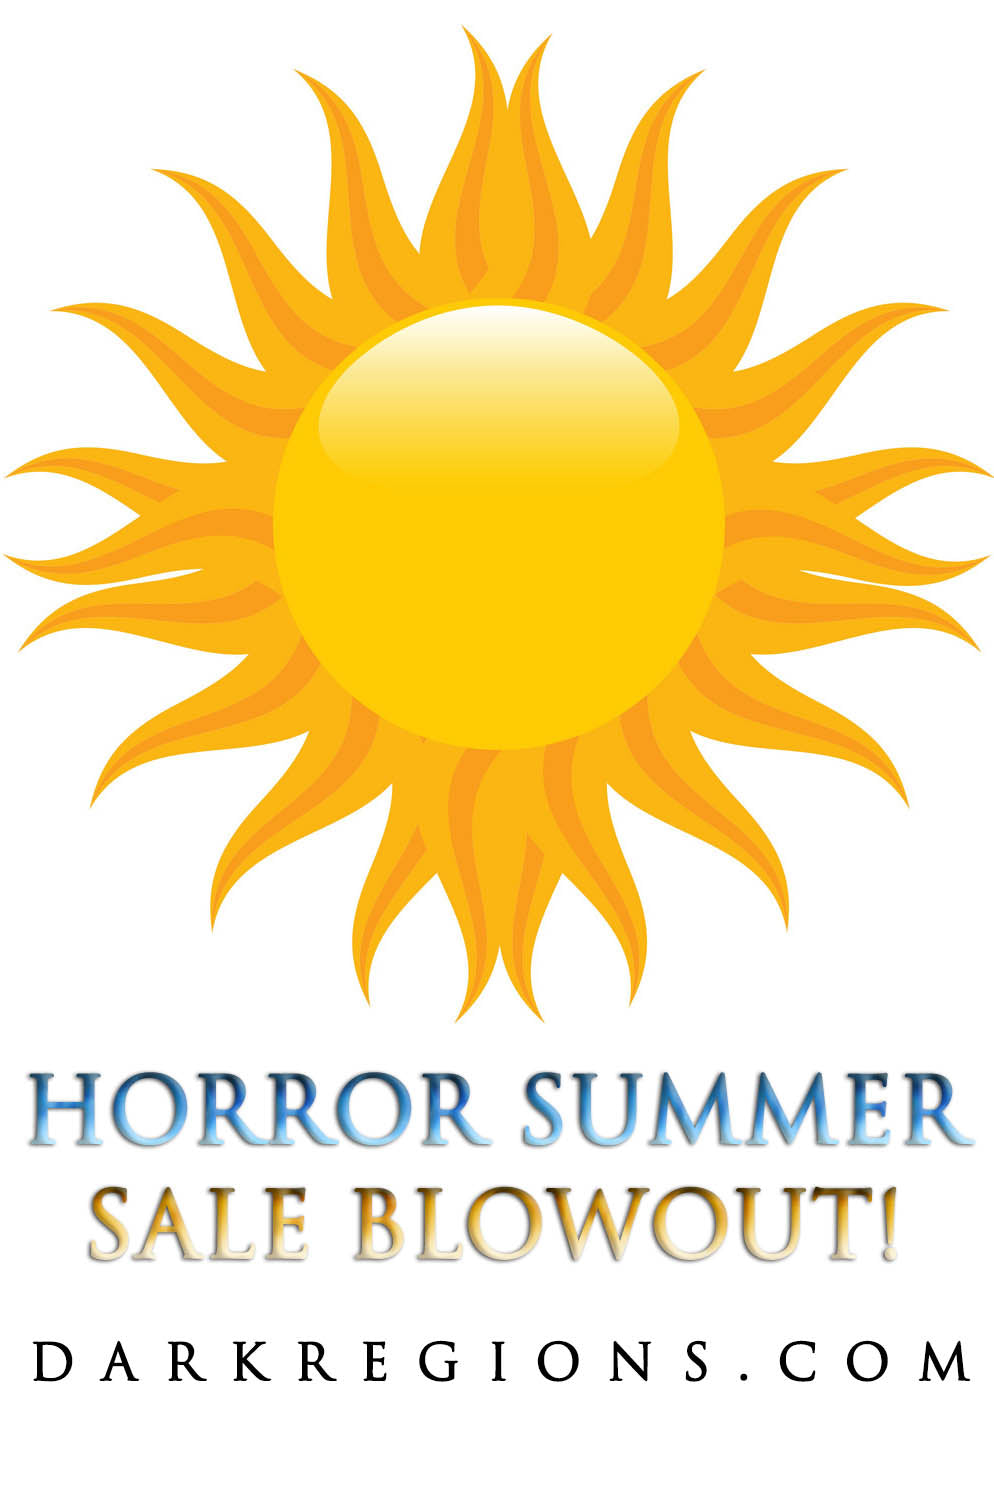 Horror Summer Sale BLOWOUT - Save Up To 33% OFF and Special Product Offerings!